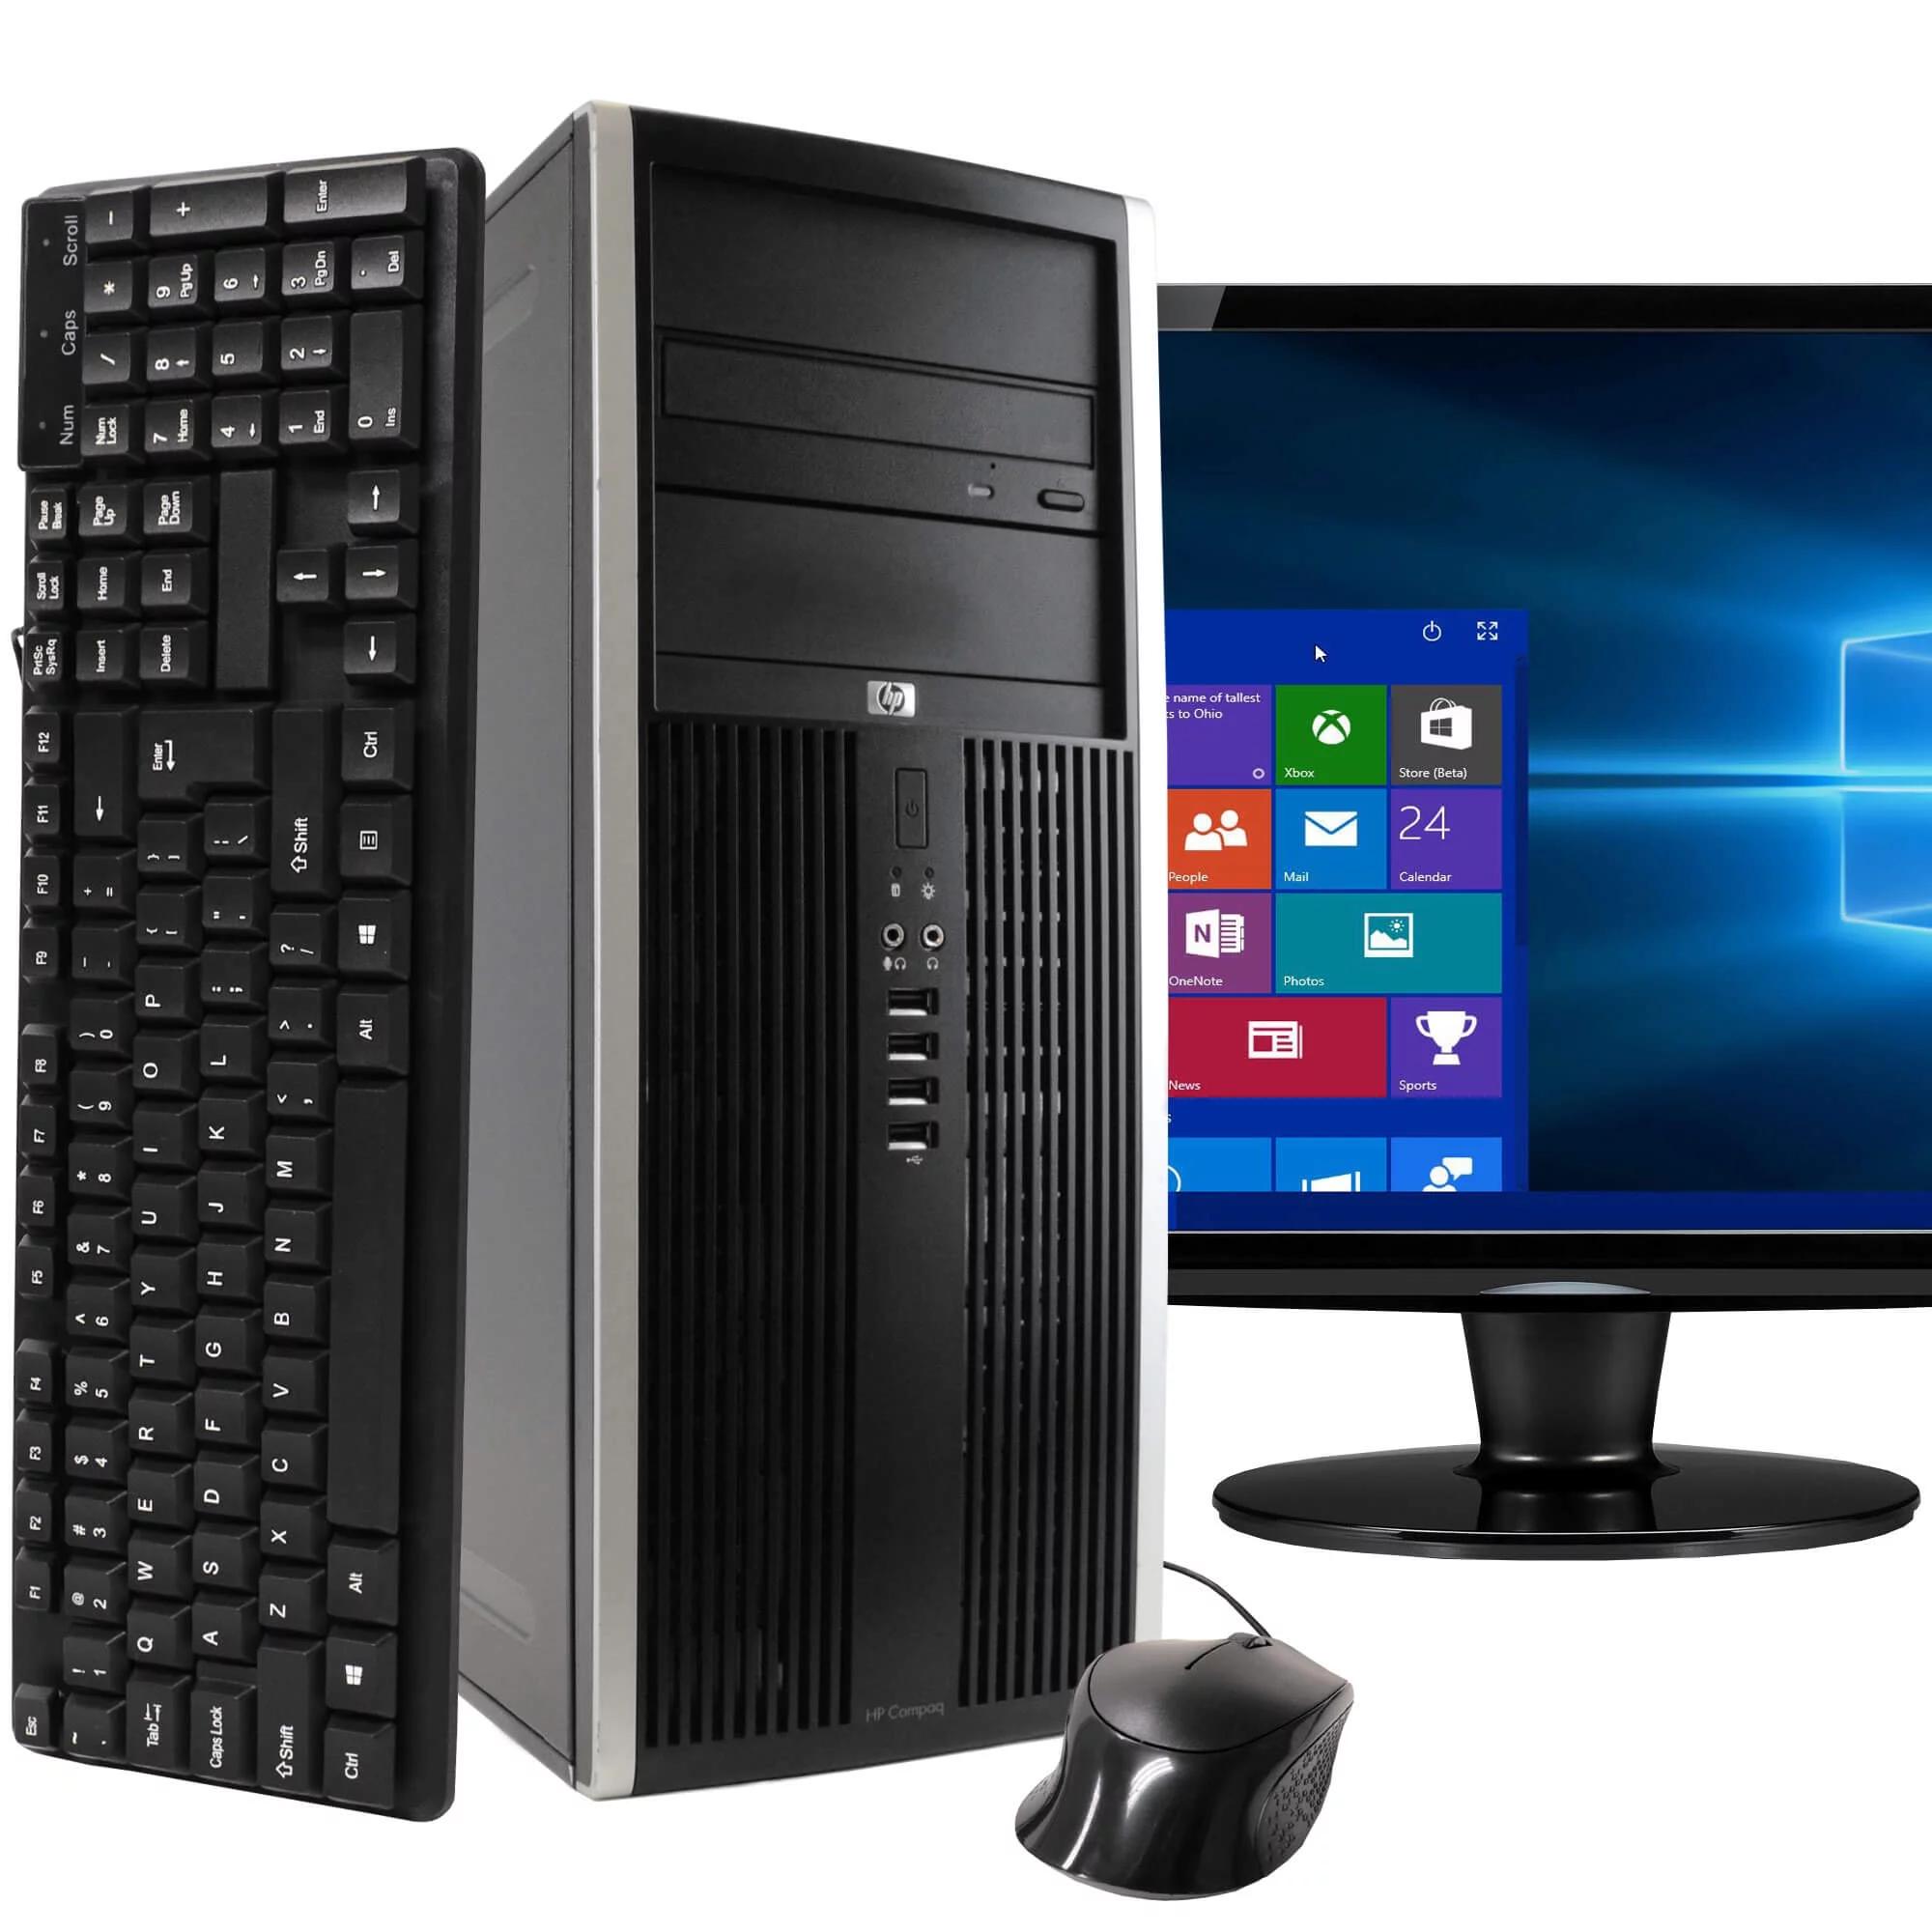 hewlett packard desktop tower - What is the difference between a PC and a PC tower